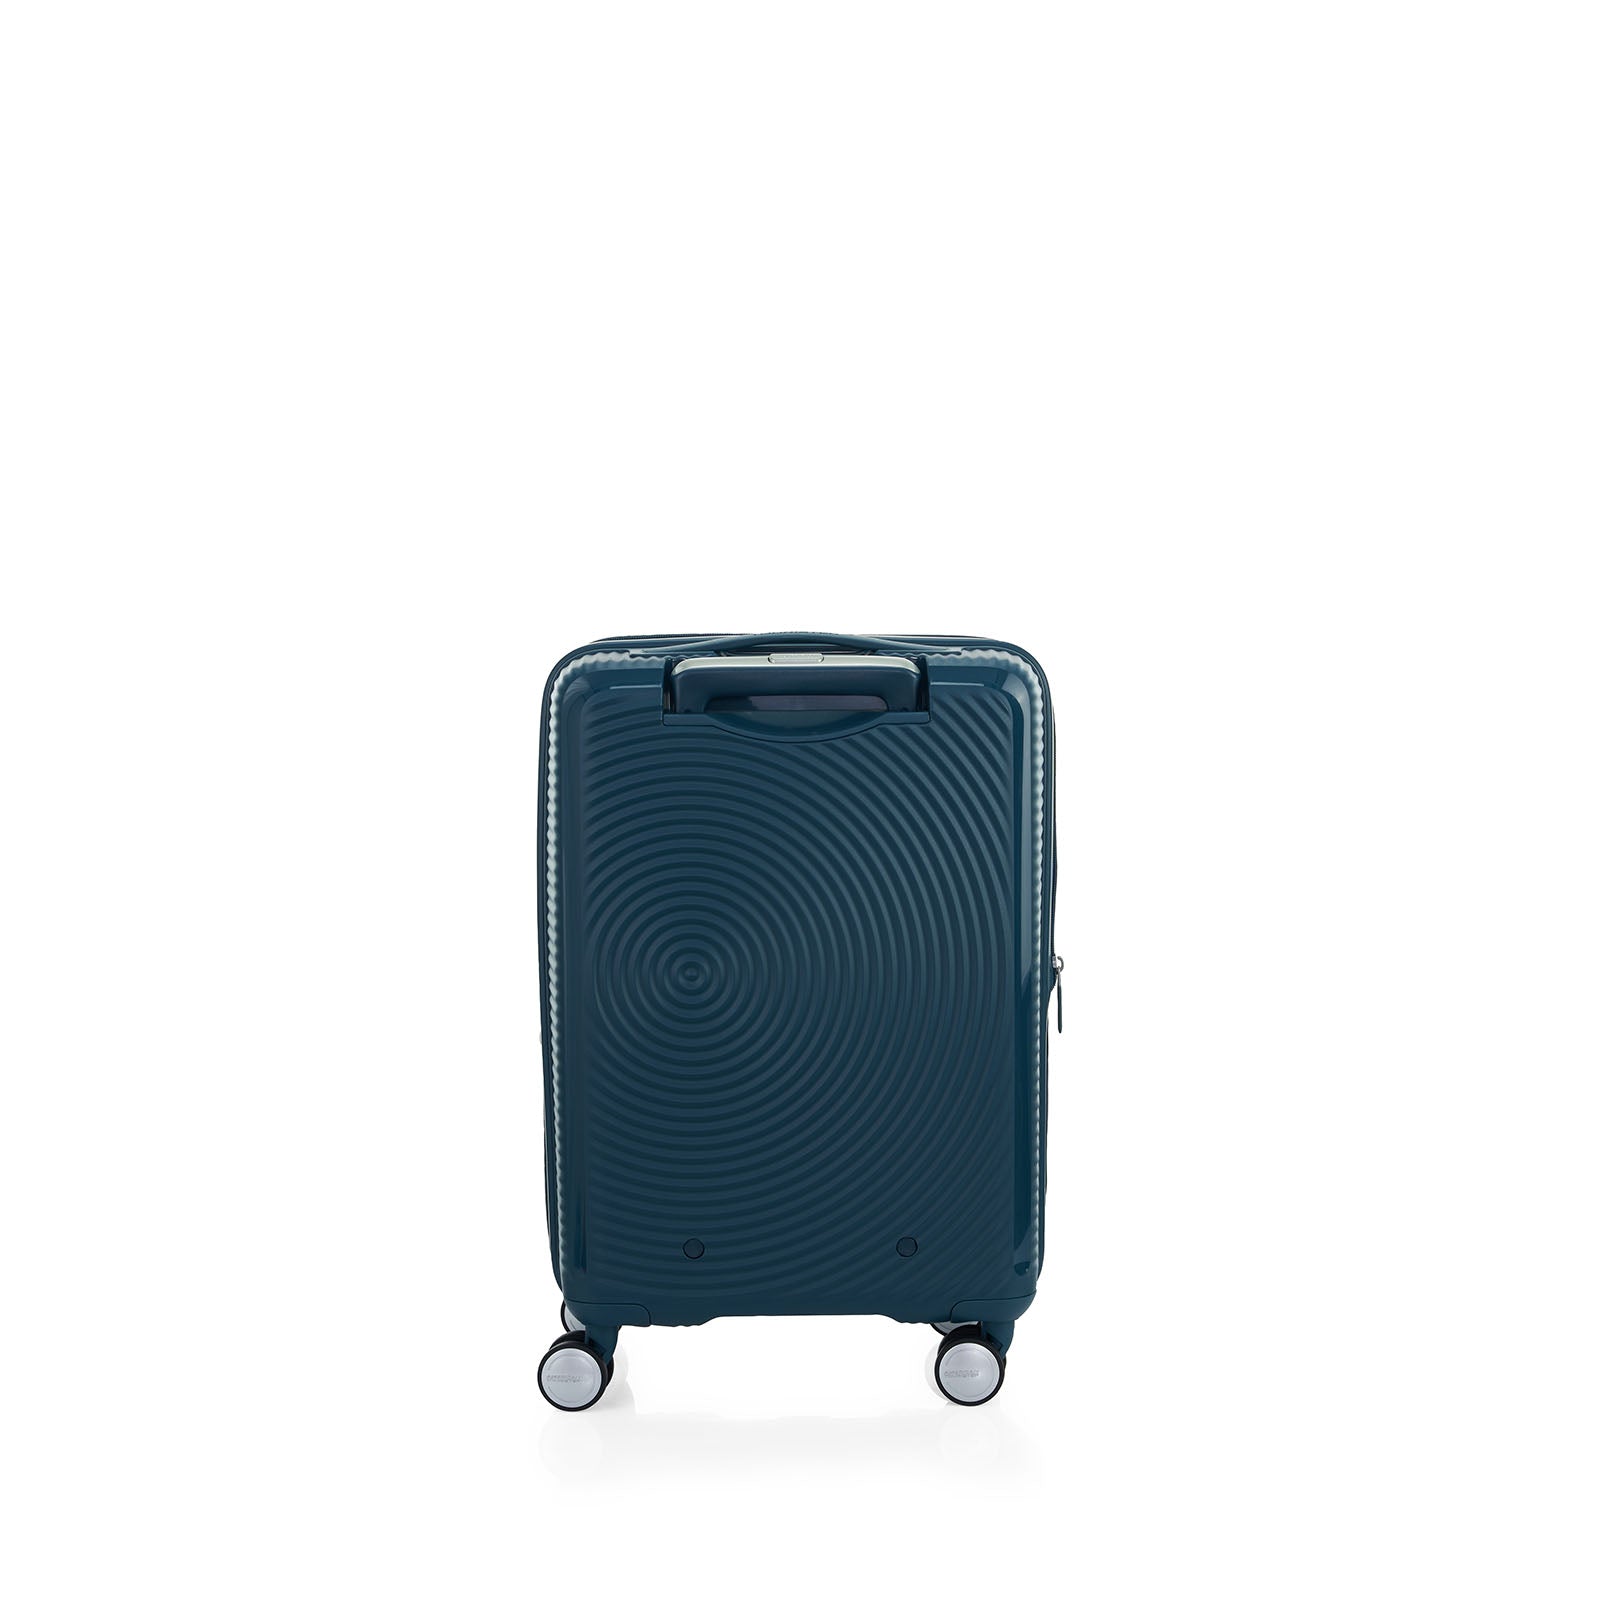 American-Tourister-Curio-2-55cm-Carry-On-Suitcase-Varisty-Green-Back